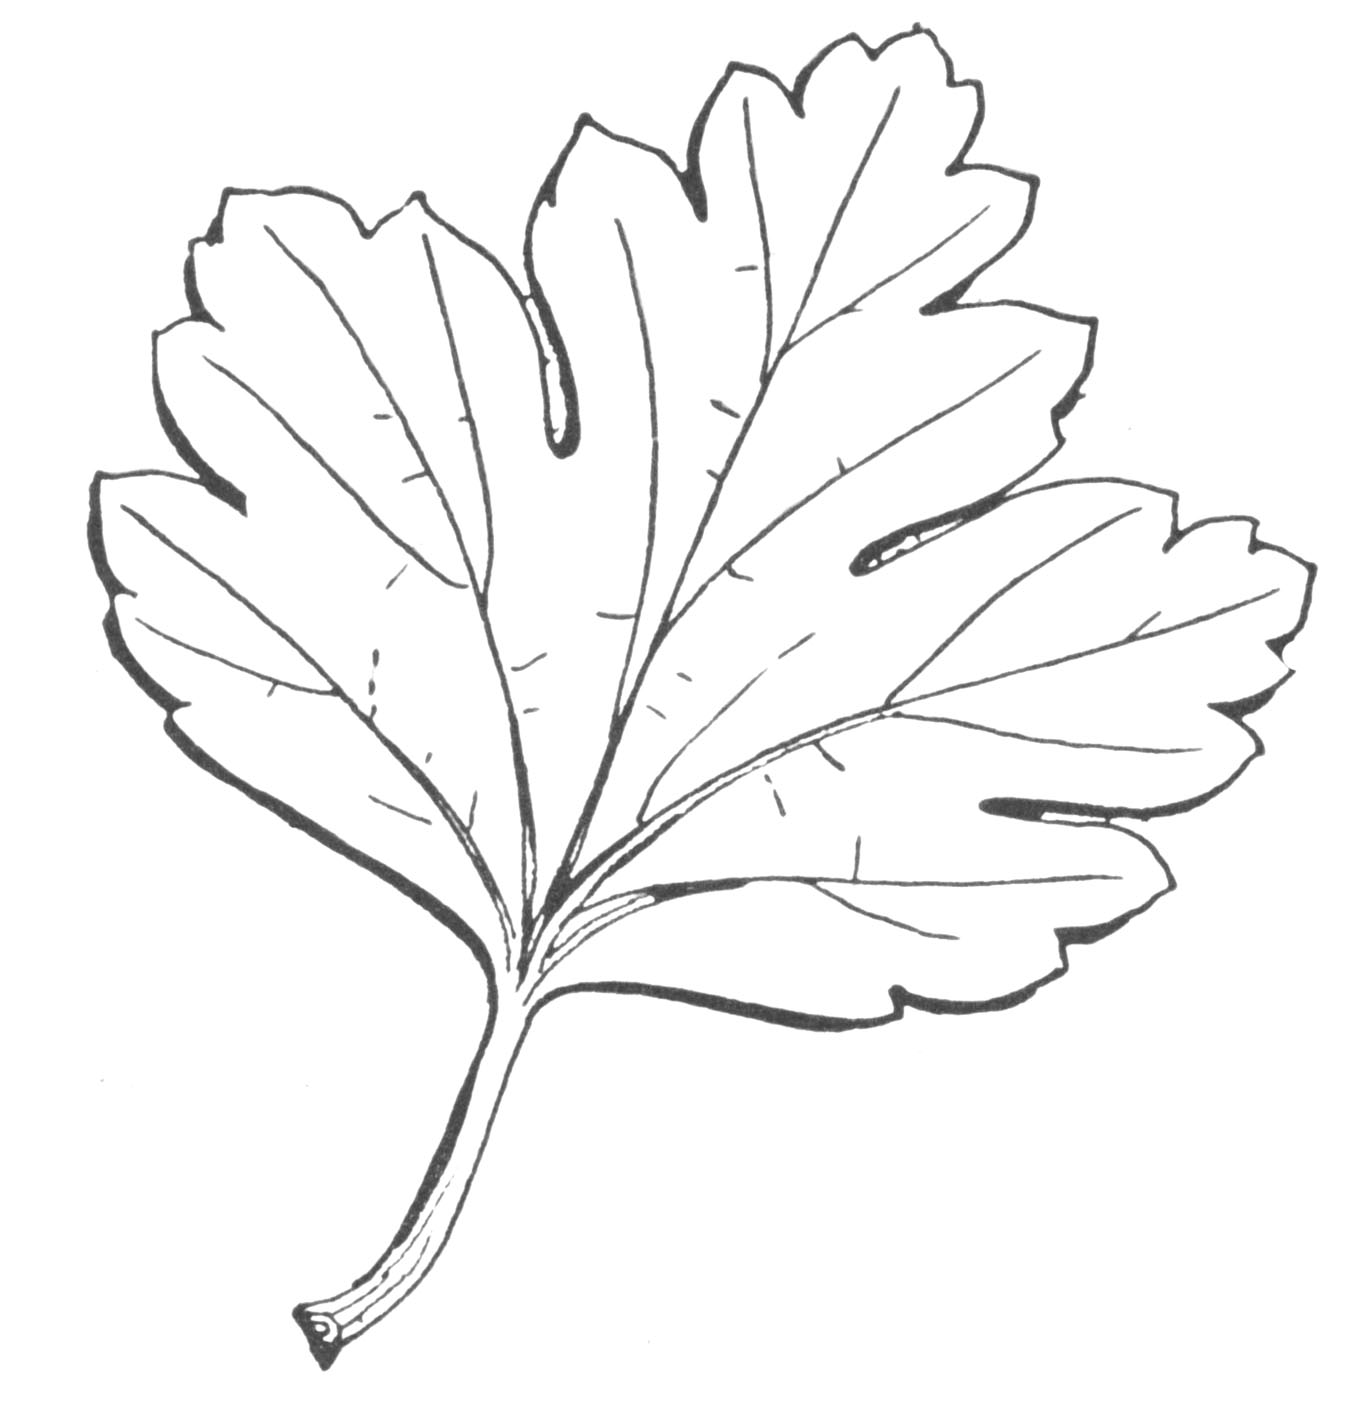 Leaves drawing